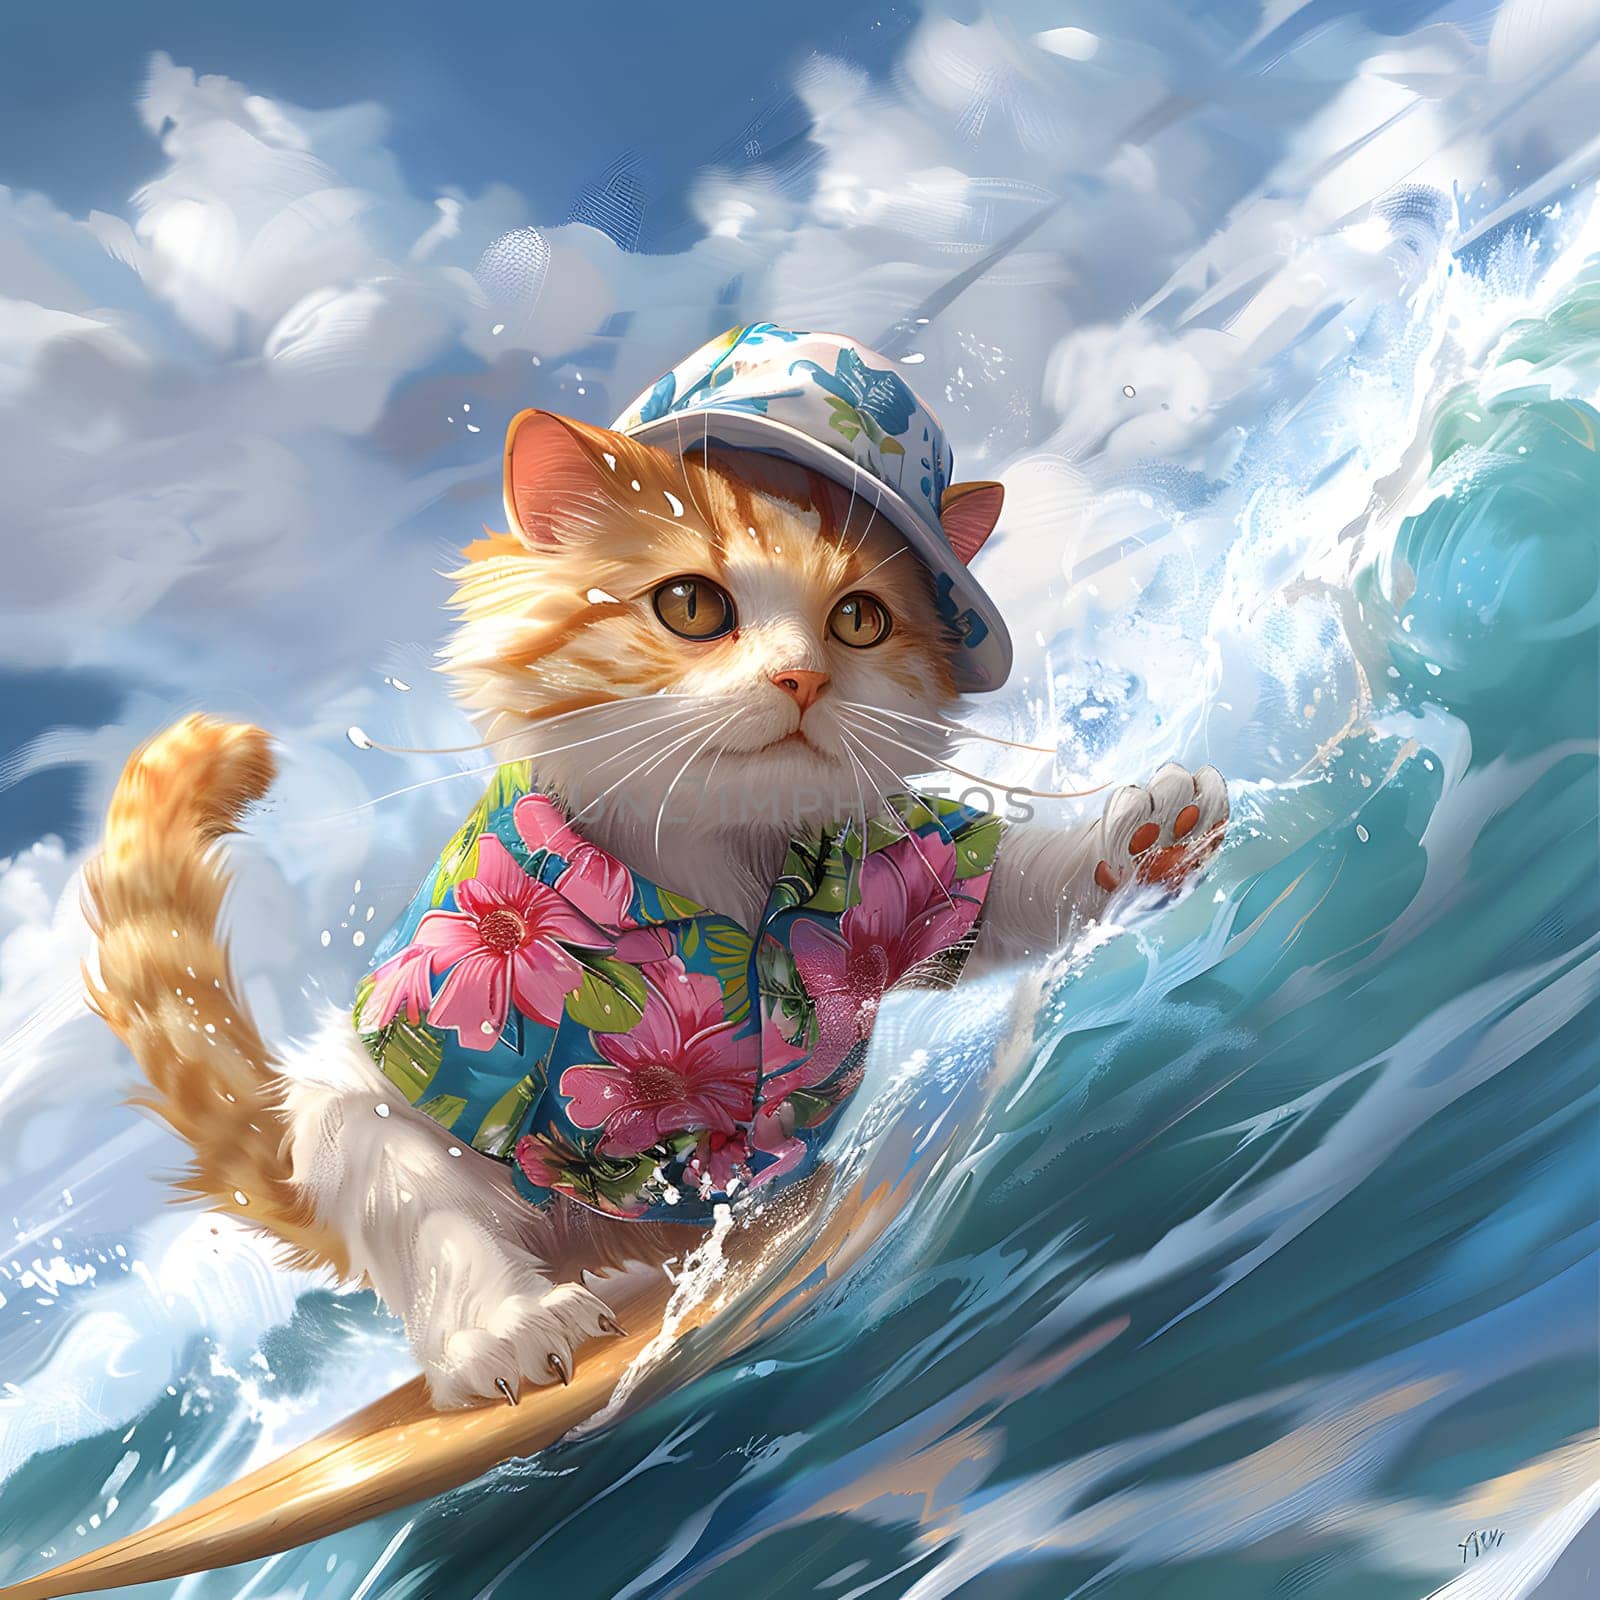 Felidae organism wears hat while surfing wave in the cartoon sky by Nadtochiy